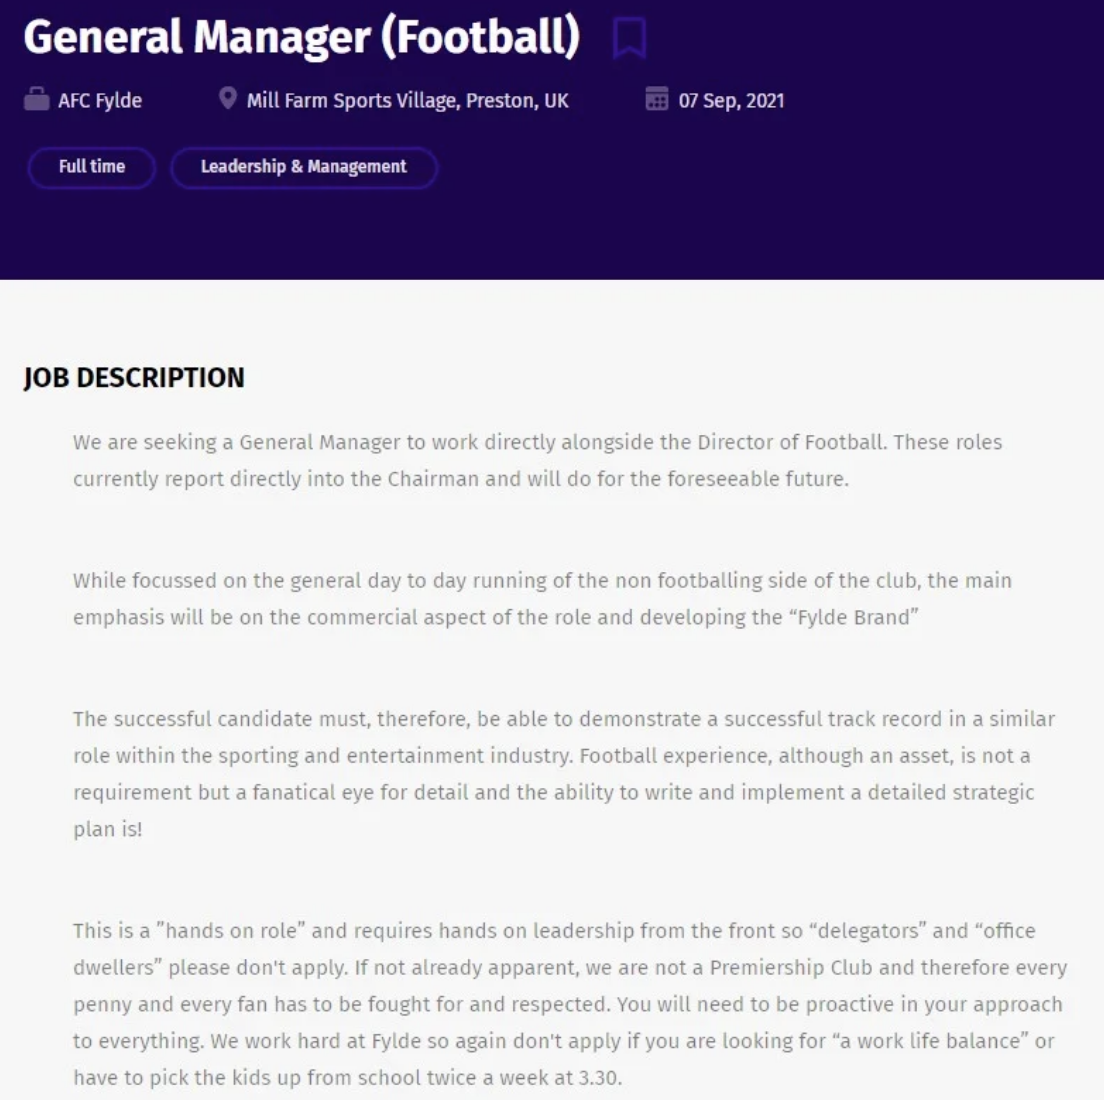 football general manager job description saying the role is mostly focused on developing the team&#x27;s brand and that you need to work hard and can&#x27;t be looking for good work/life balance